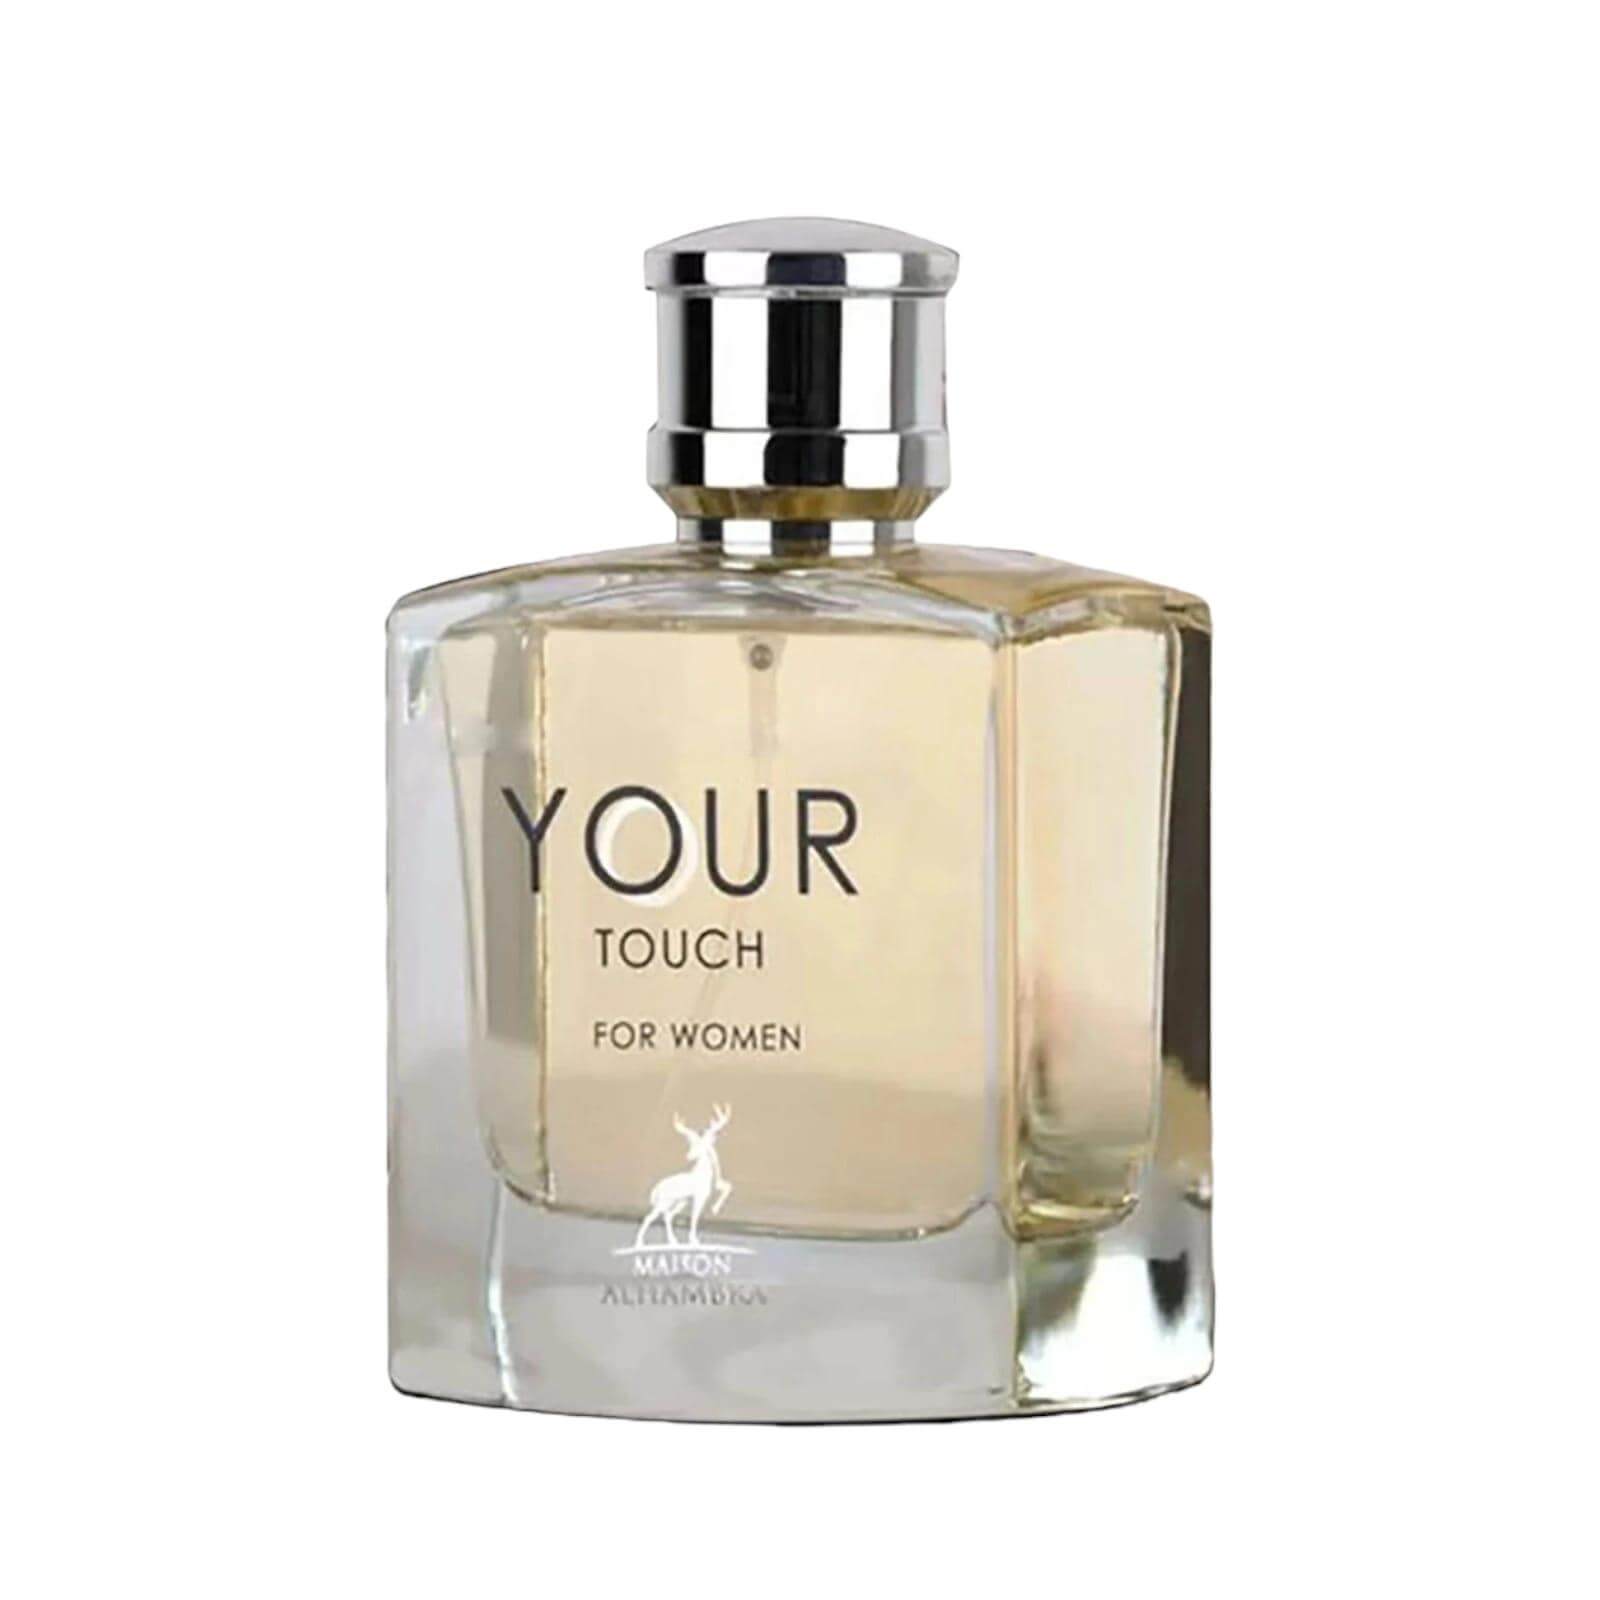 Your Touch For Women Perfume / Eau De Parfum 100Ml By Maison Alhambra / Lattafa (Inspired By Emporio Armani Stronger With You)